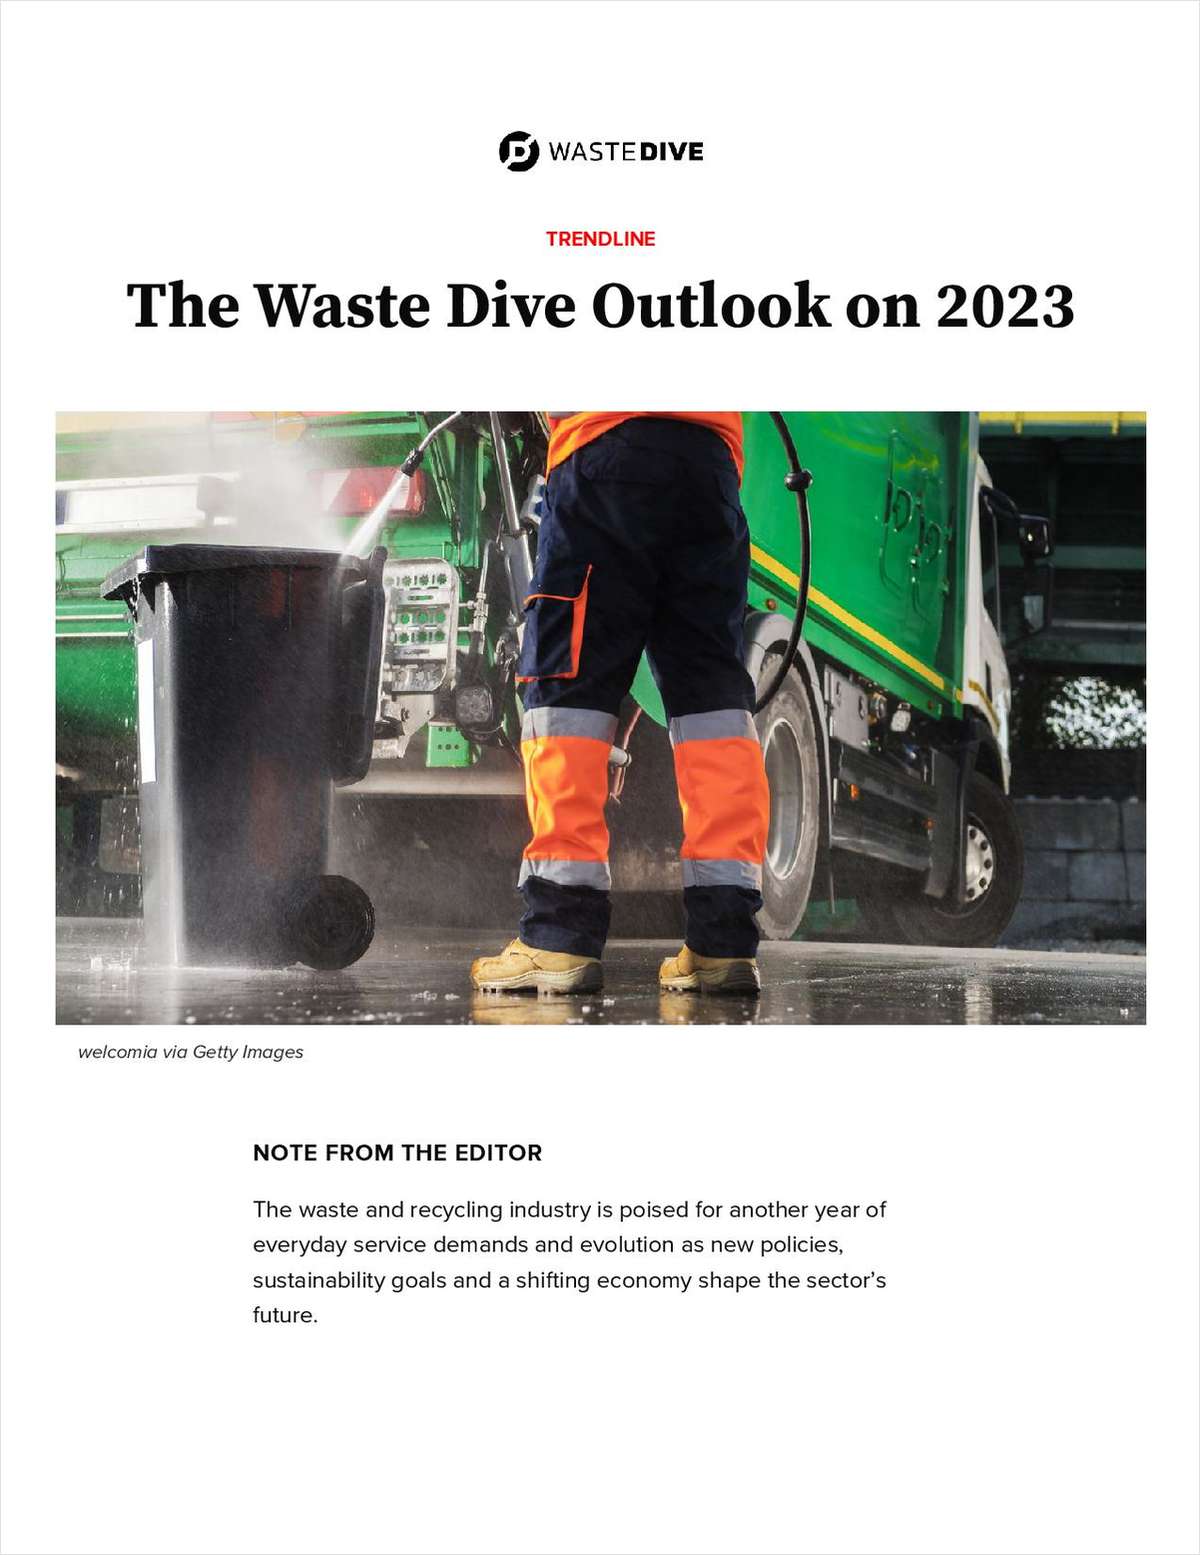 The Waste Dive Outlook on 2023